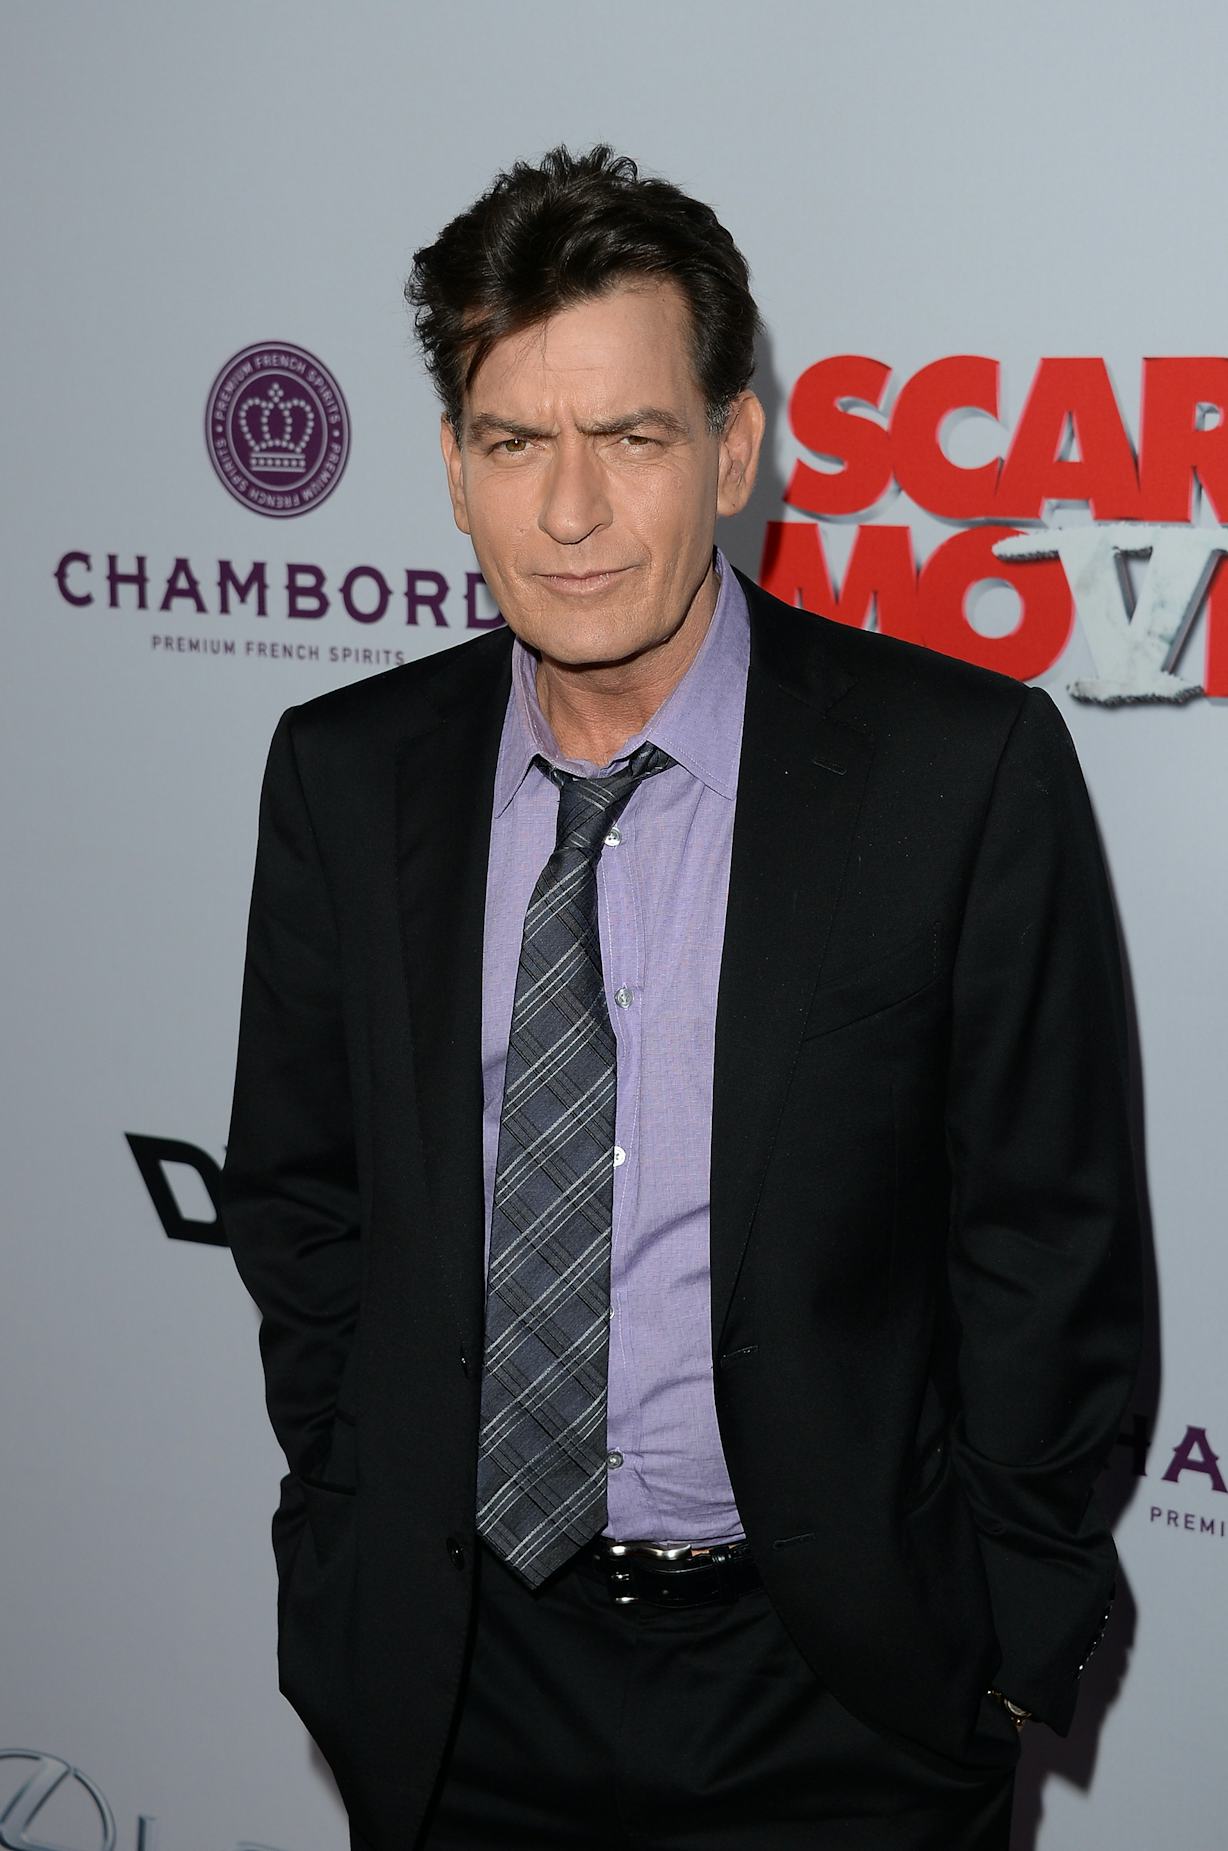 Charlie Sheen Announces He's HIV Positive During 'Today' Show Interview